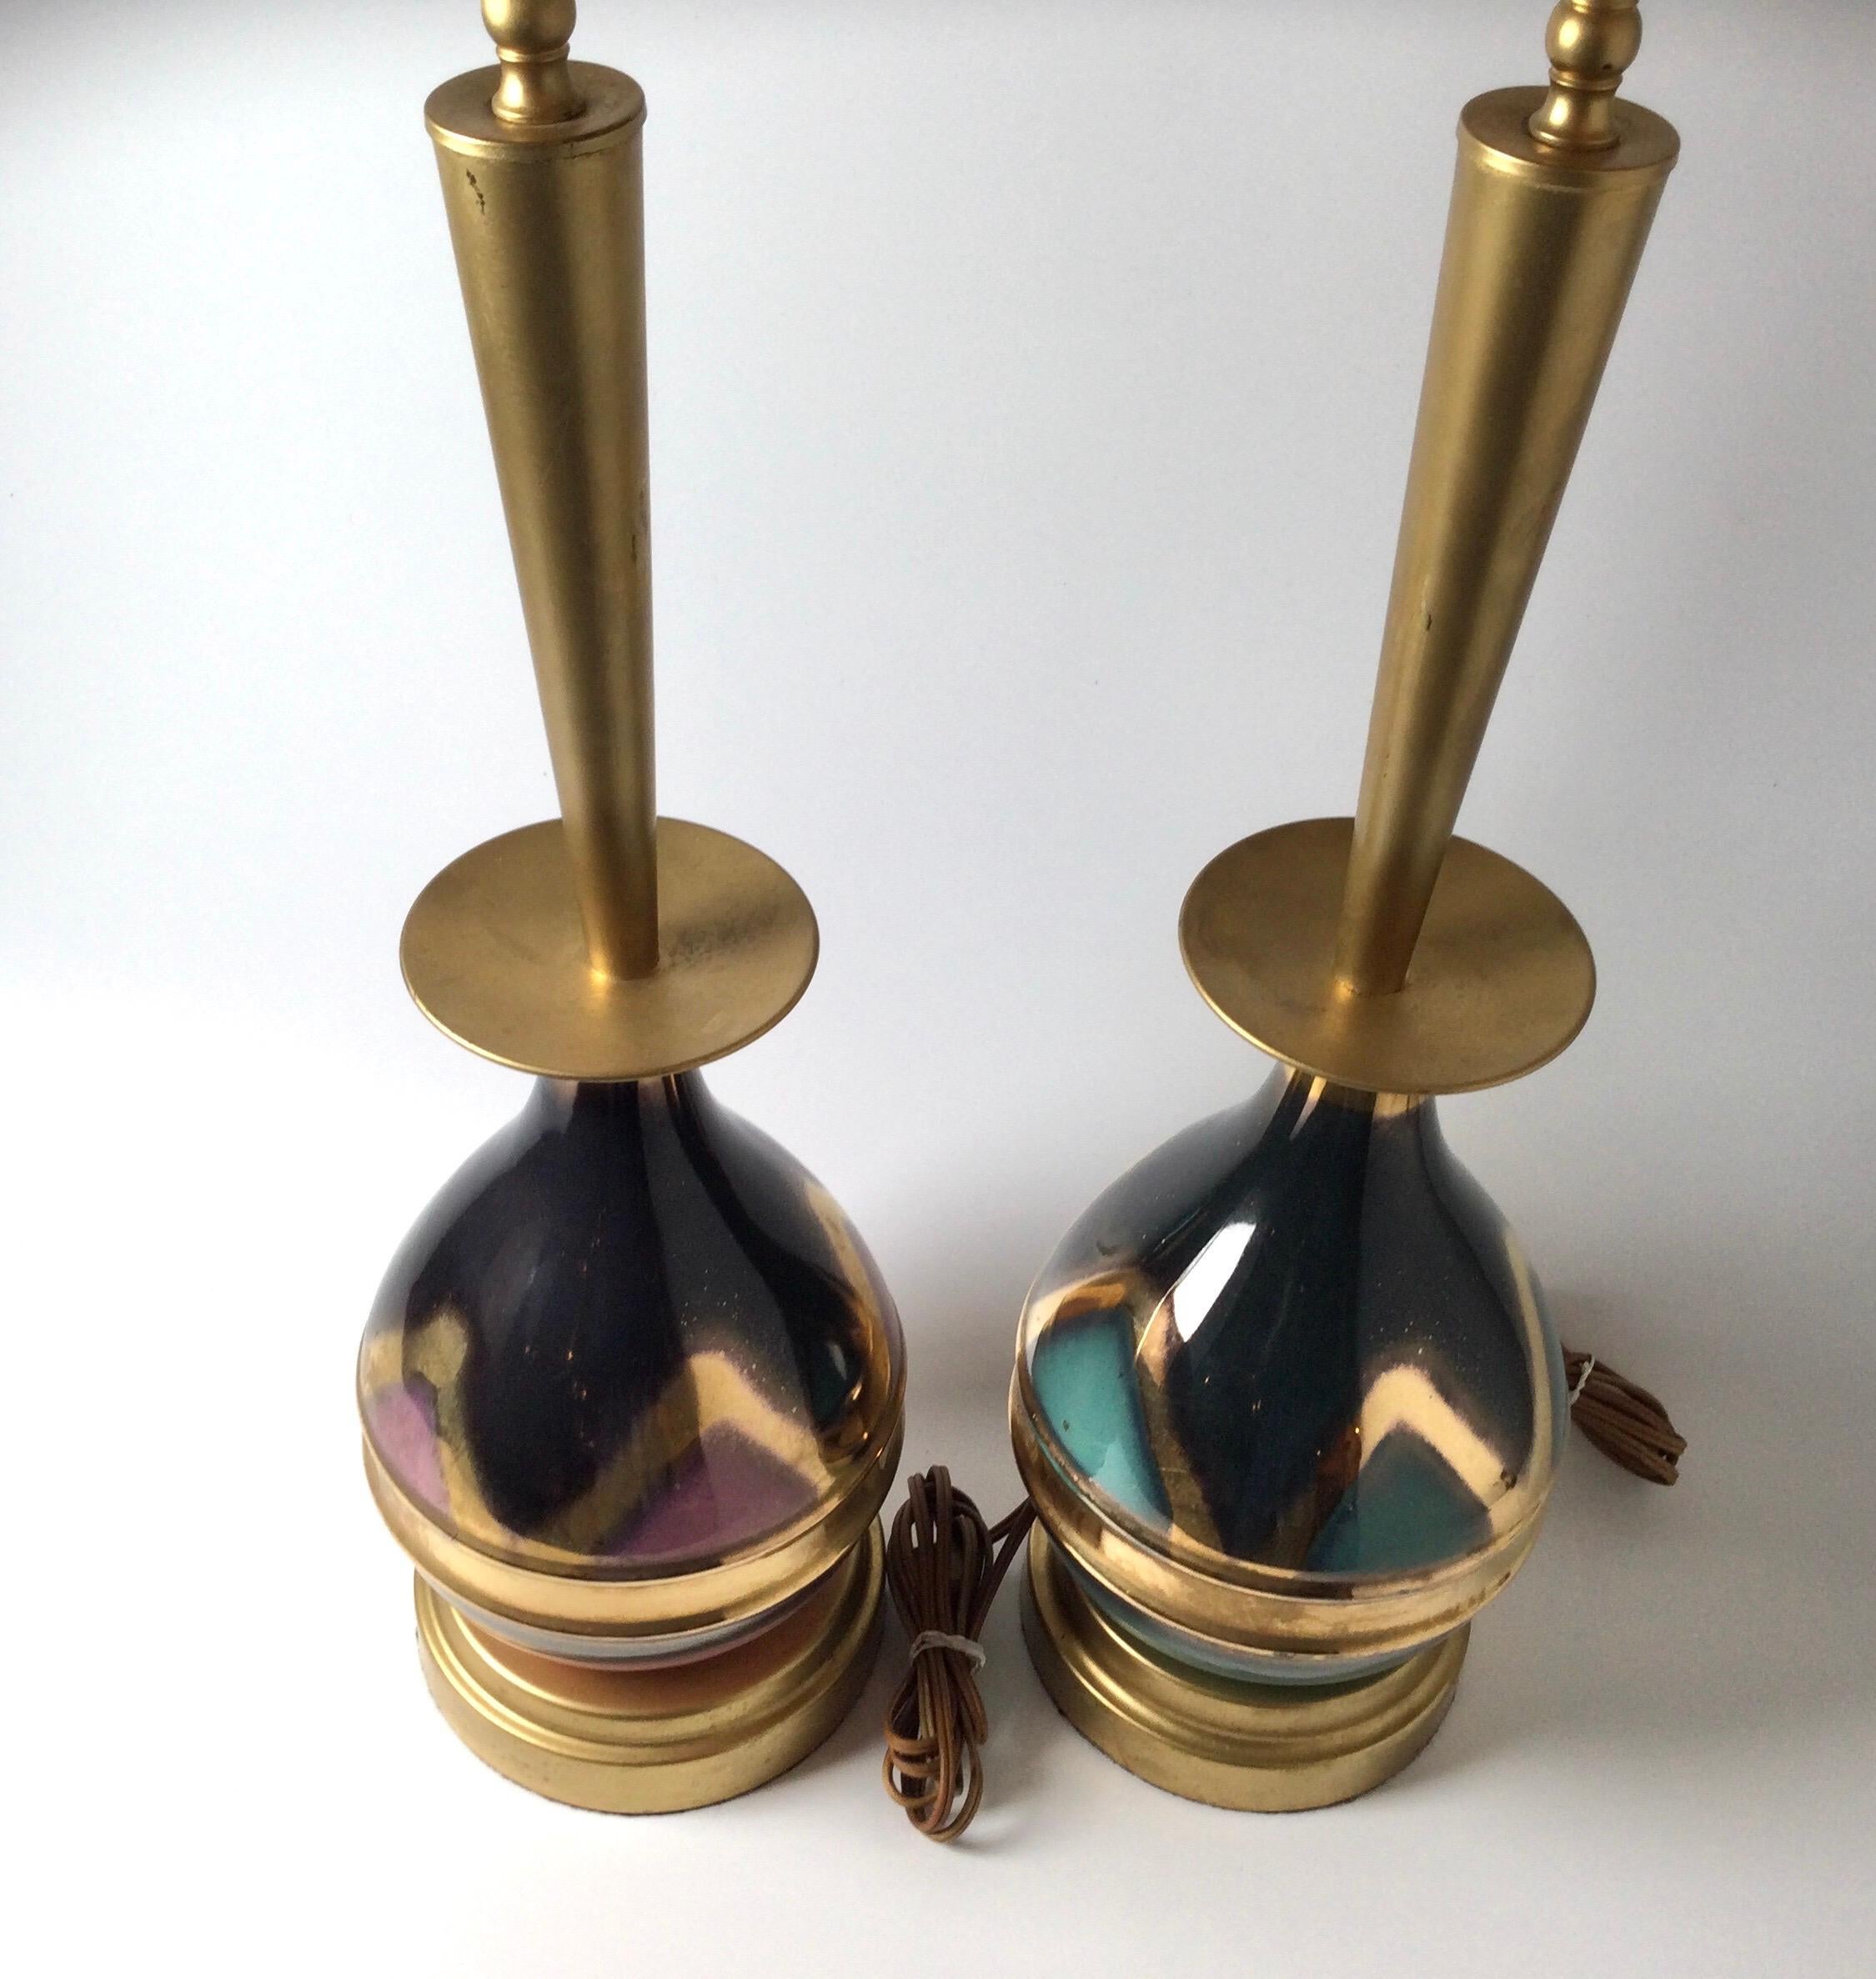 Mid-20th Century Pair of Mid-Century Modern 1950s Metal and Metallic Glazed Porcelain Lamps For Sale